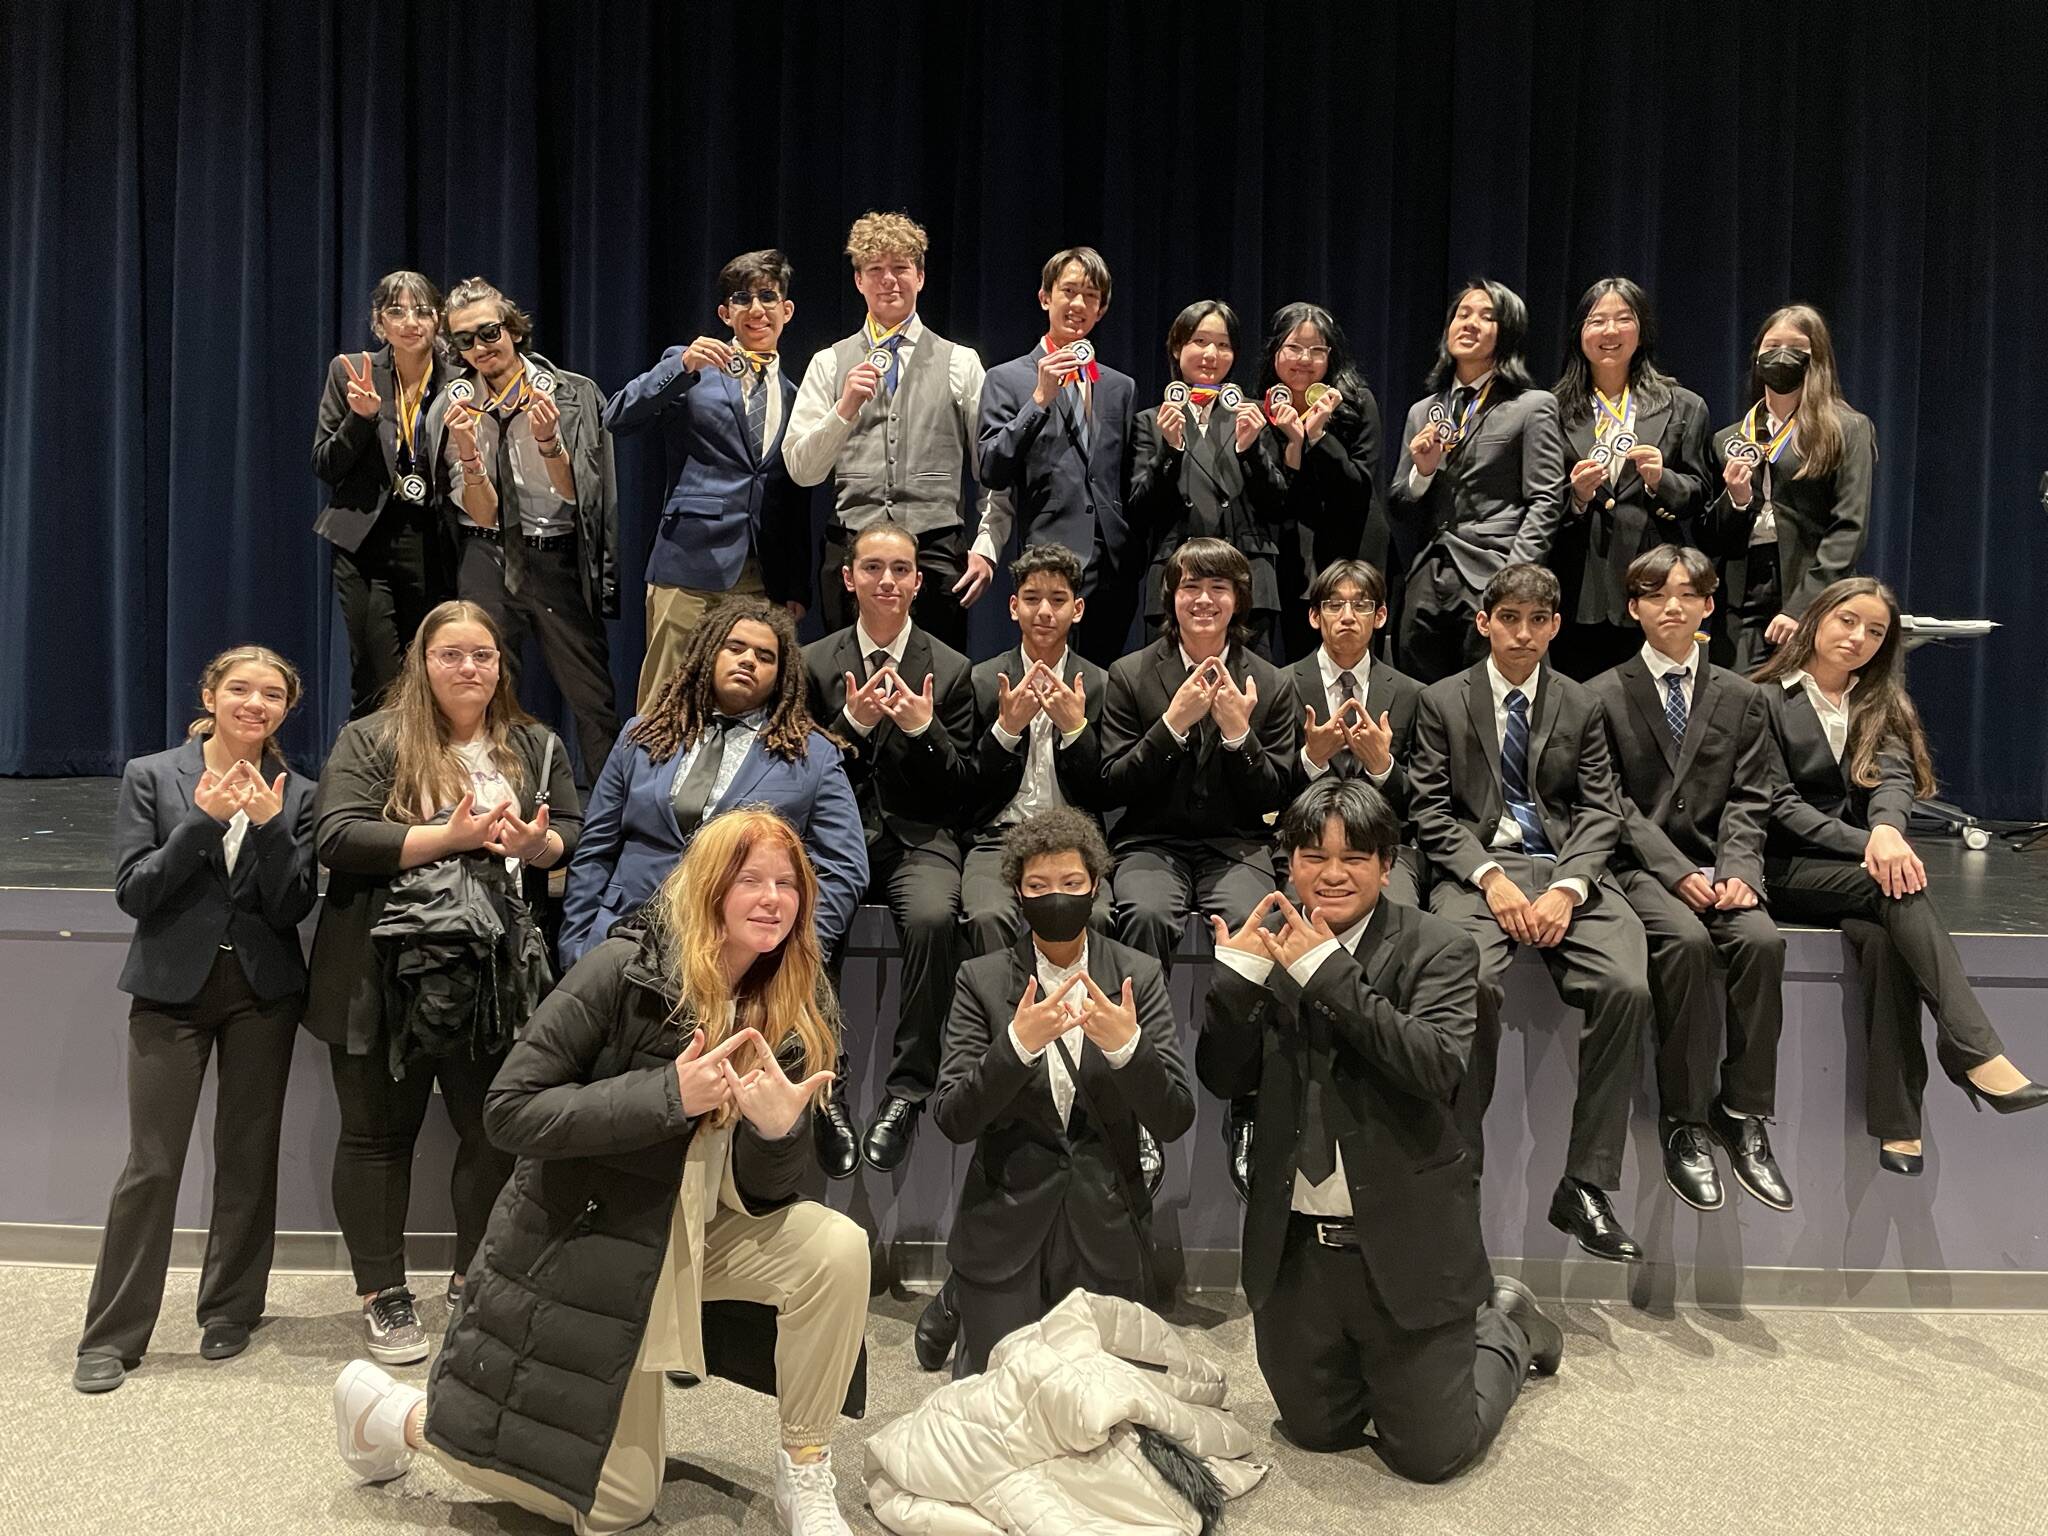 Eleven Todd Beamer DECA members qualified on Jan. 5 for the state competition. Photo courtesy of Andrew Luu